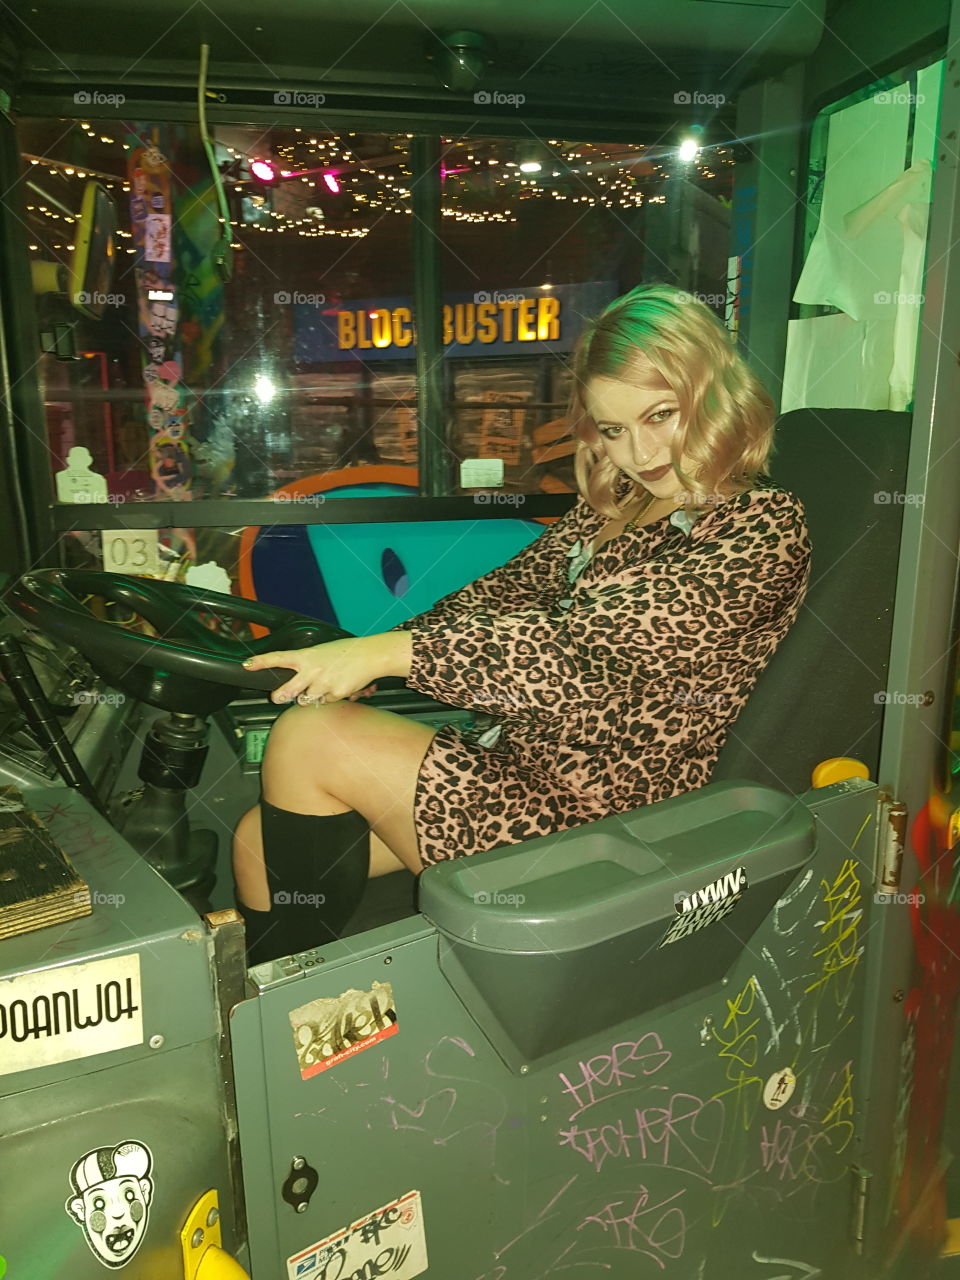 riding the bus at ghetto golf in Birmingham wearing leopard print dress and knee high boots. very drunk having fun posing for a photo around Christmas time. graffiti in the background oldschool blockbuster videos